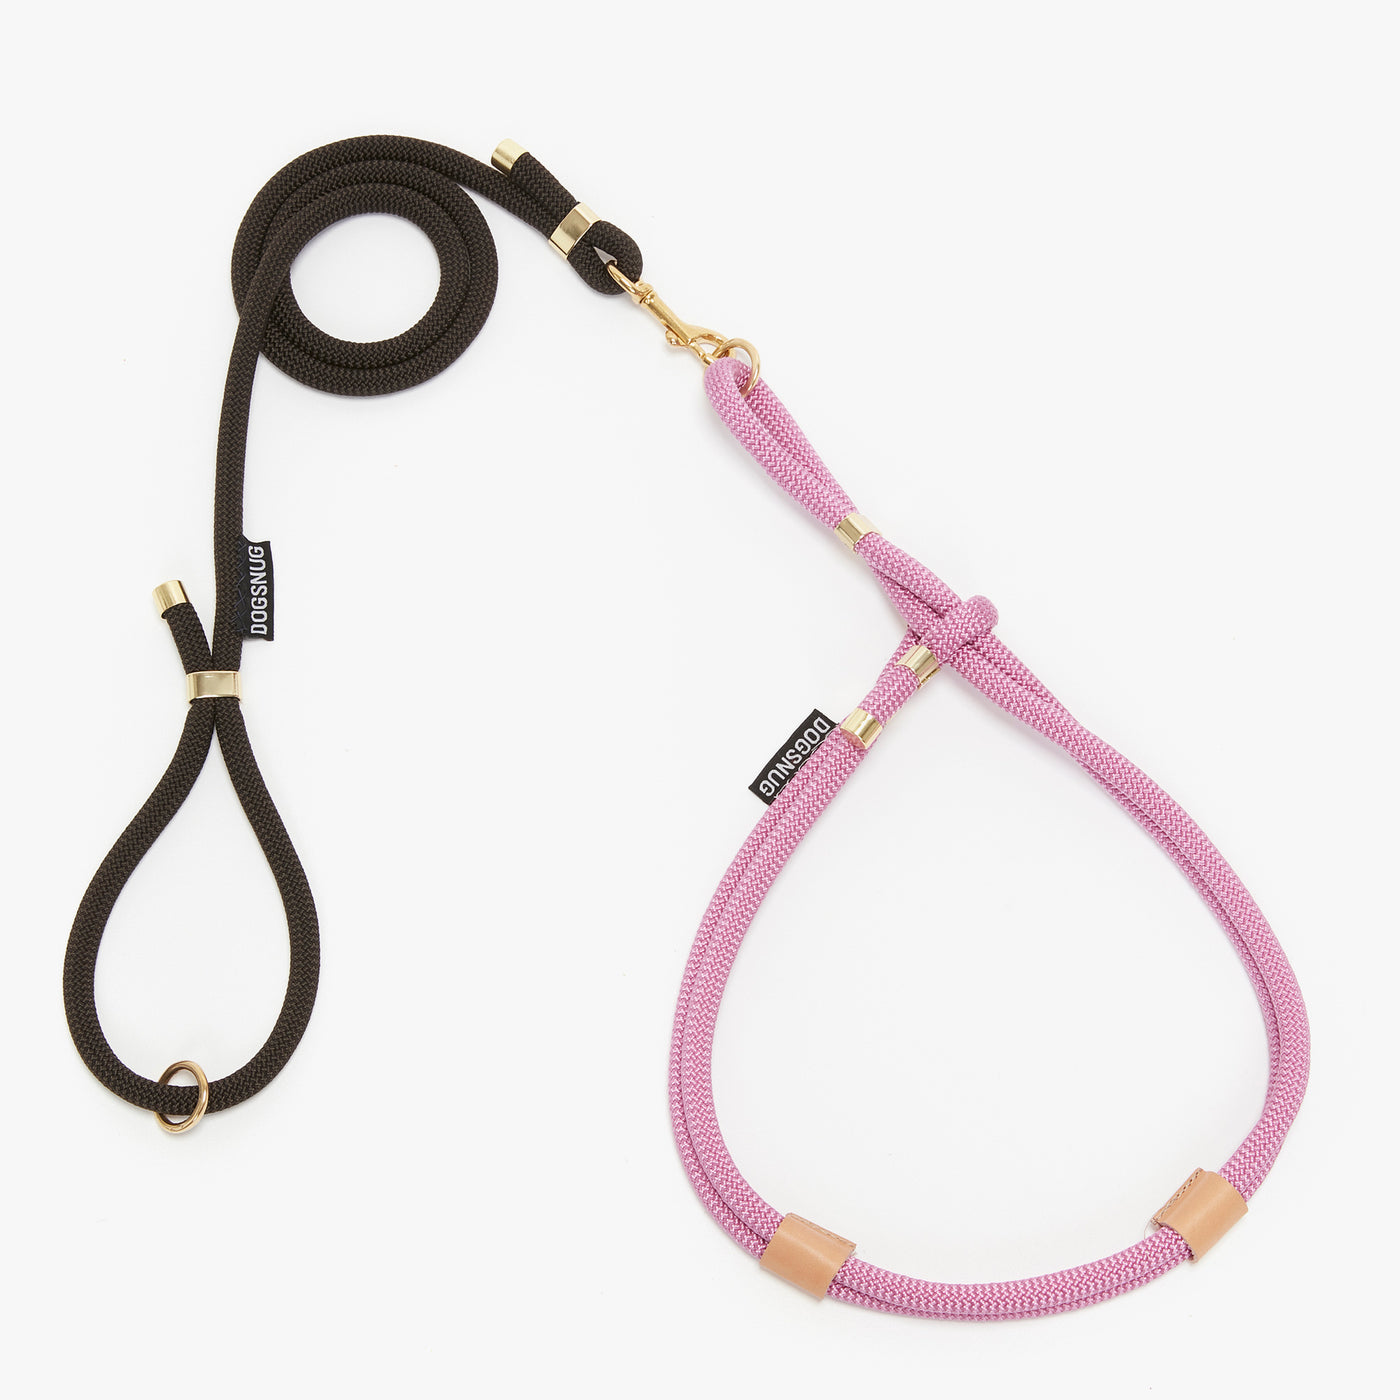 Dog rope harness in pink with matching lead